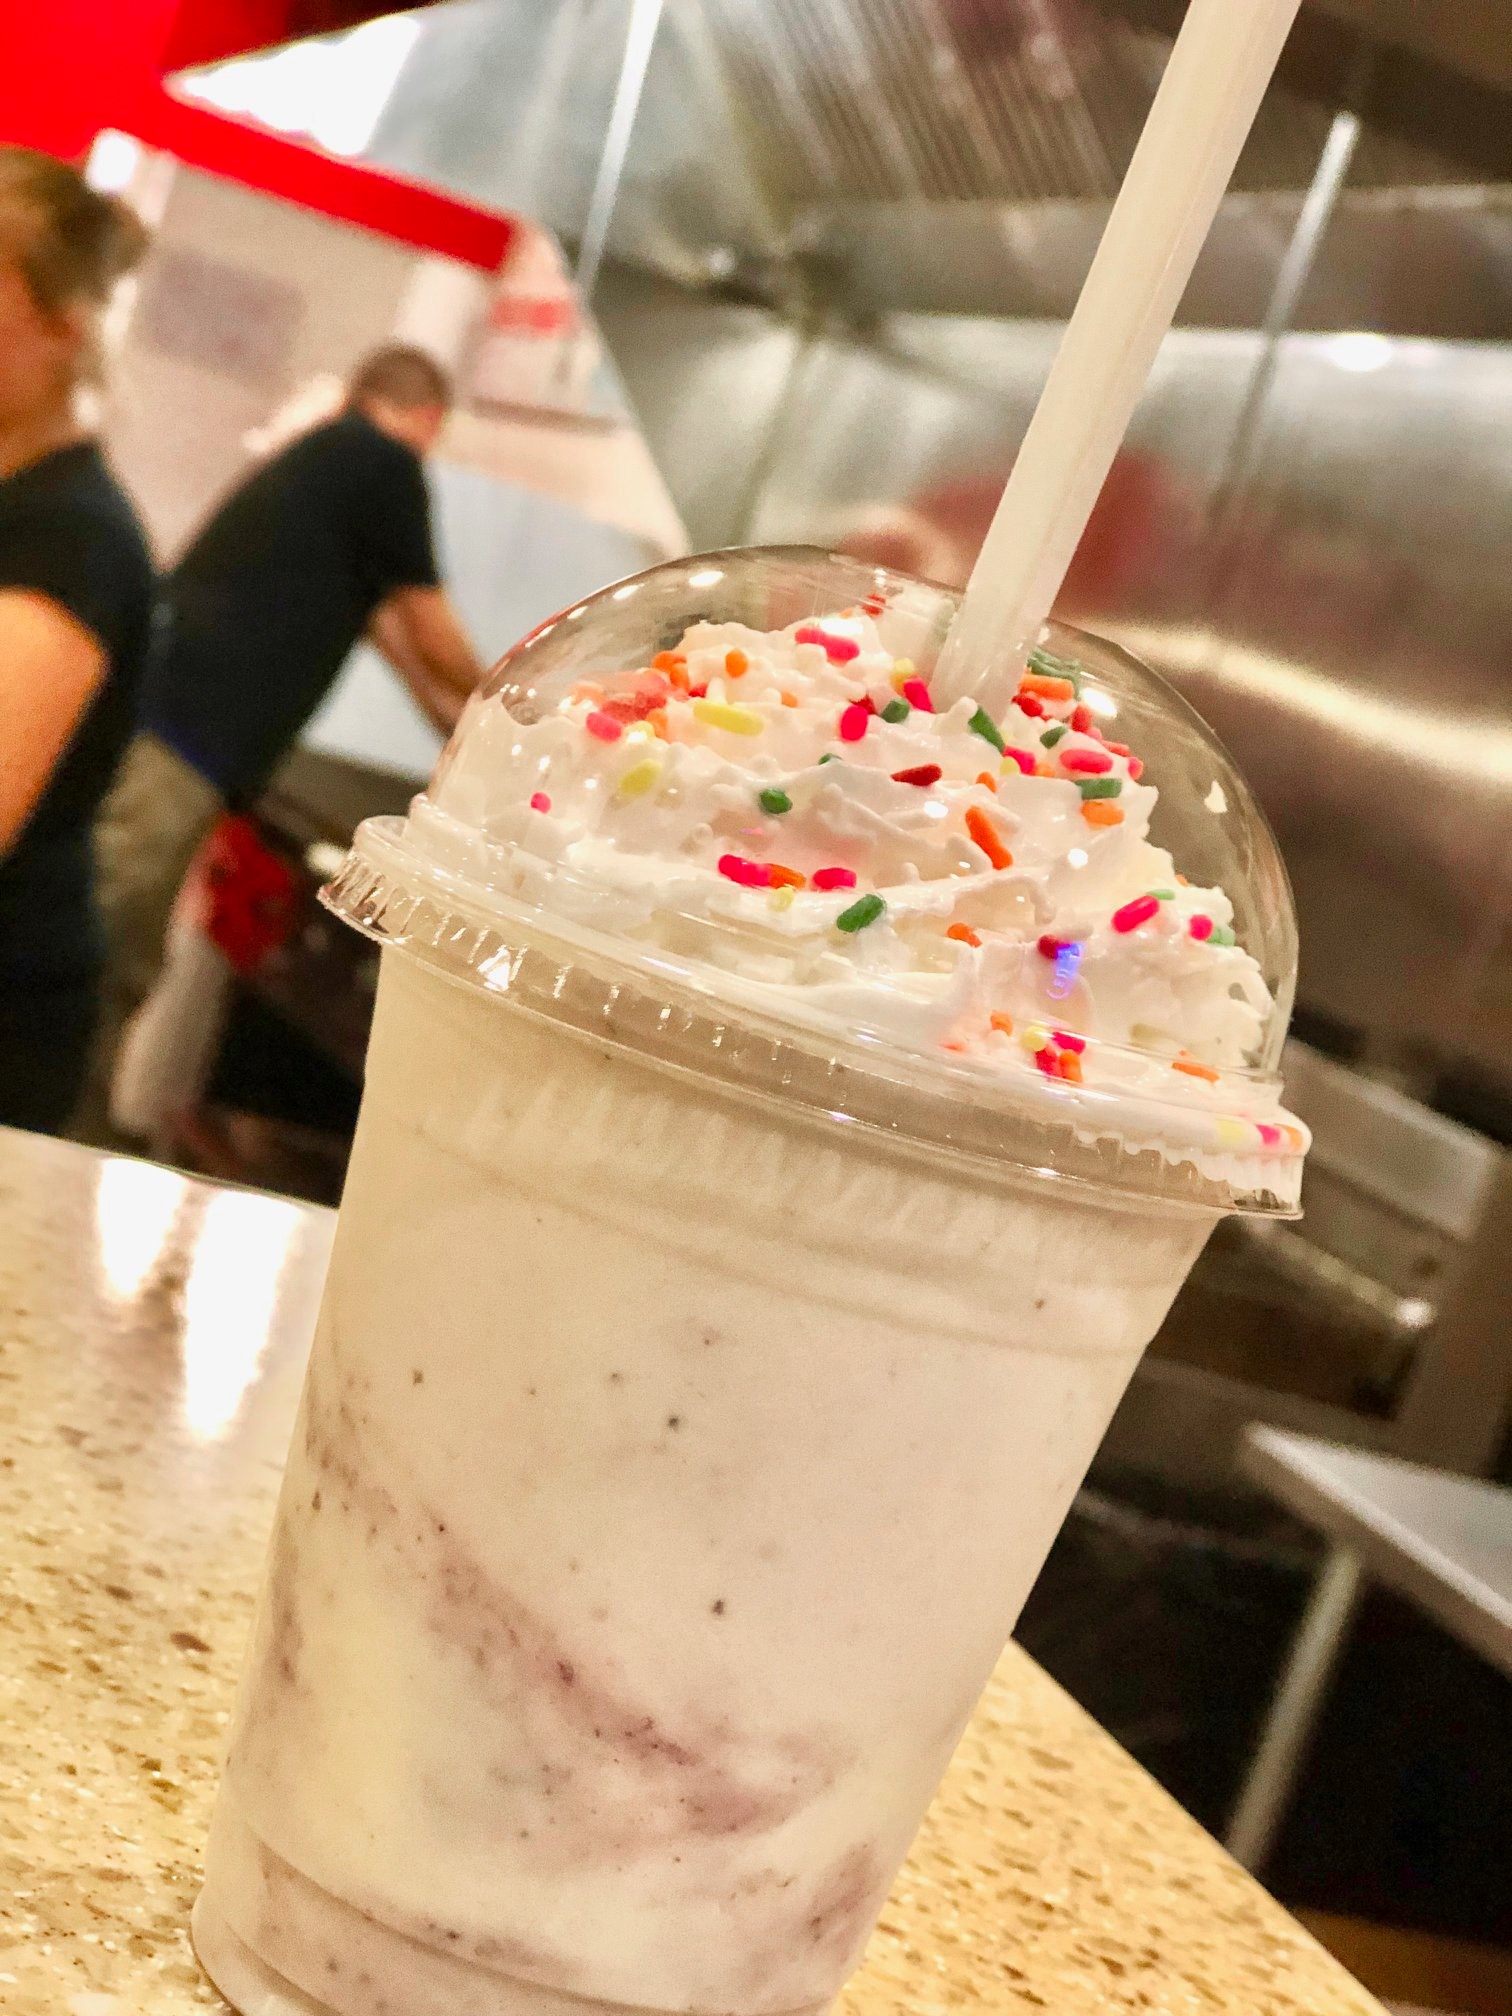 A milkshake with whip cream and rainbow sprinkles on top from Bogey's Burgers in Redmond, Oregon.